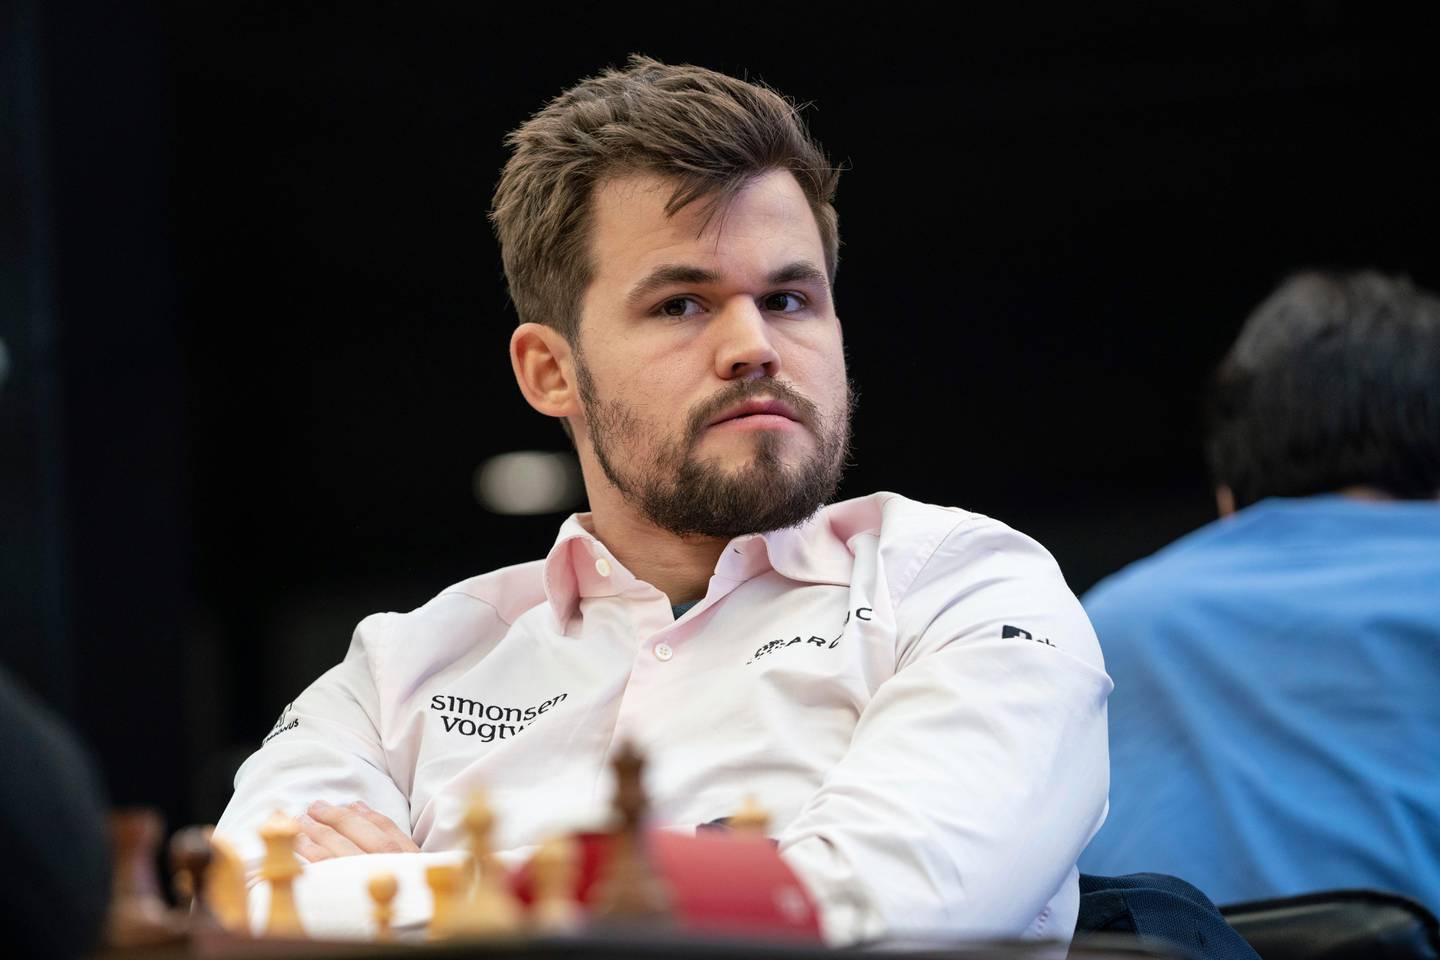 Magnus Carlsen, Norwegian chess grandmaster and the current World Chess Champion attends the Open World Rapid and Blitz Championships in Moscow, Russia, Saturday, Dec. 28, 2019. (AP Photo/Maria Emelianova)